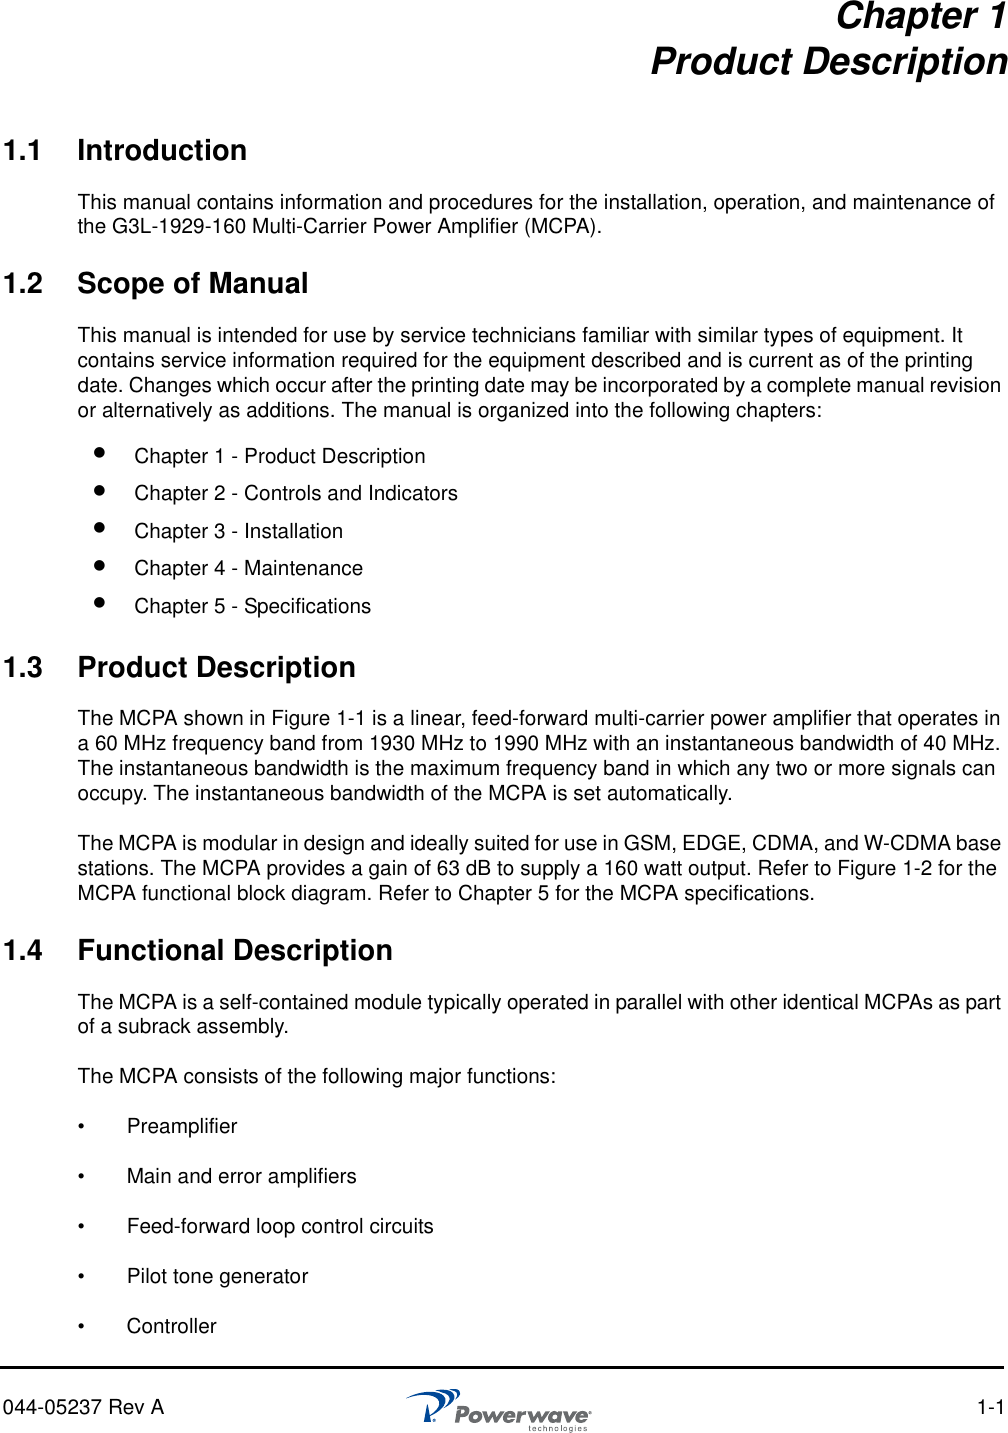 044-05237 Rev A 1-1Chapter 1Product Description1.1 IntroductionThis manual contains information and procedures for the installation, operation, and maintenance of the G3L-1929-160 Multi-Carrier Power Amplifier (MCPA).1.2 Scope of ManualThis manual is intended for use by service technicians familiar with similar types of equipment. It contains service information required for the equipment described and is current as of the printing date. Changes which occur after the printing date may be incorporated by a complete manual revision or alternatively as additions. The manual is organized into the following chapters:1.3 Product DescriptionThe MCPA shown in Figure 1-1 is a linear, feed-forward multi-carrier power amplifier that operates in a 60 MHz frequency band from 1930 MHz to 1990 MHz with an instantaneous bandwidth of 40 MHz. The instantaneous bandwidth is the maximum frequency band in which any two or more signals can occupy. The instantaneous bandwidth of the MCPA is set automatically.The MCPA is modular in design and ideally suited for use in GSM, EDGE, CDMA, and W-CDMA base stations. The MCPA provides a gain of 63 dB to supply a 160 watt output. Refer to Figure 1-2 for the MCPA functional block diagram. Refer to Chapter 5 for the MCPA specifications.1.4 Functional DescriptionThe MCPA is a self-contained module typically operated in parallel with other identical MCPAs as part of a subrack assembly. The MCPA consists of the following major functions:•   Preamplifier •   Main and error amplifiers•   Feed-forward loop control circuits•   Pilot tone generator•   Controller Chapter 1 - Product Description Chapter 2 - Controls and Indicators Chapter 3 - Installation Chapter 4 - Maintenance Chapter 5 - Specifications